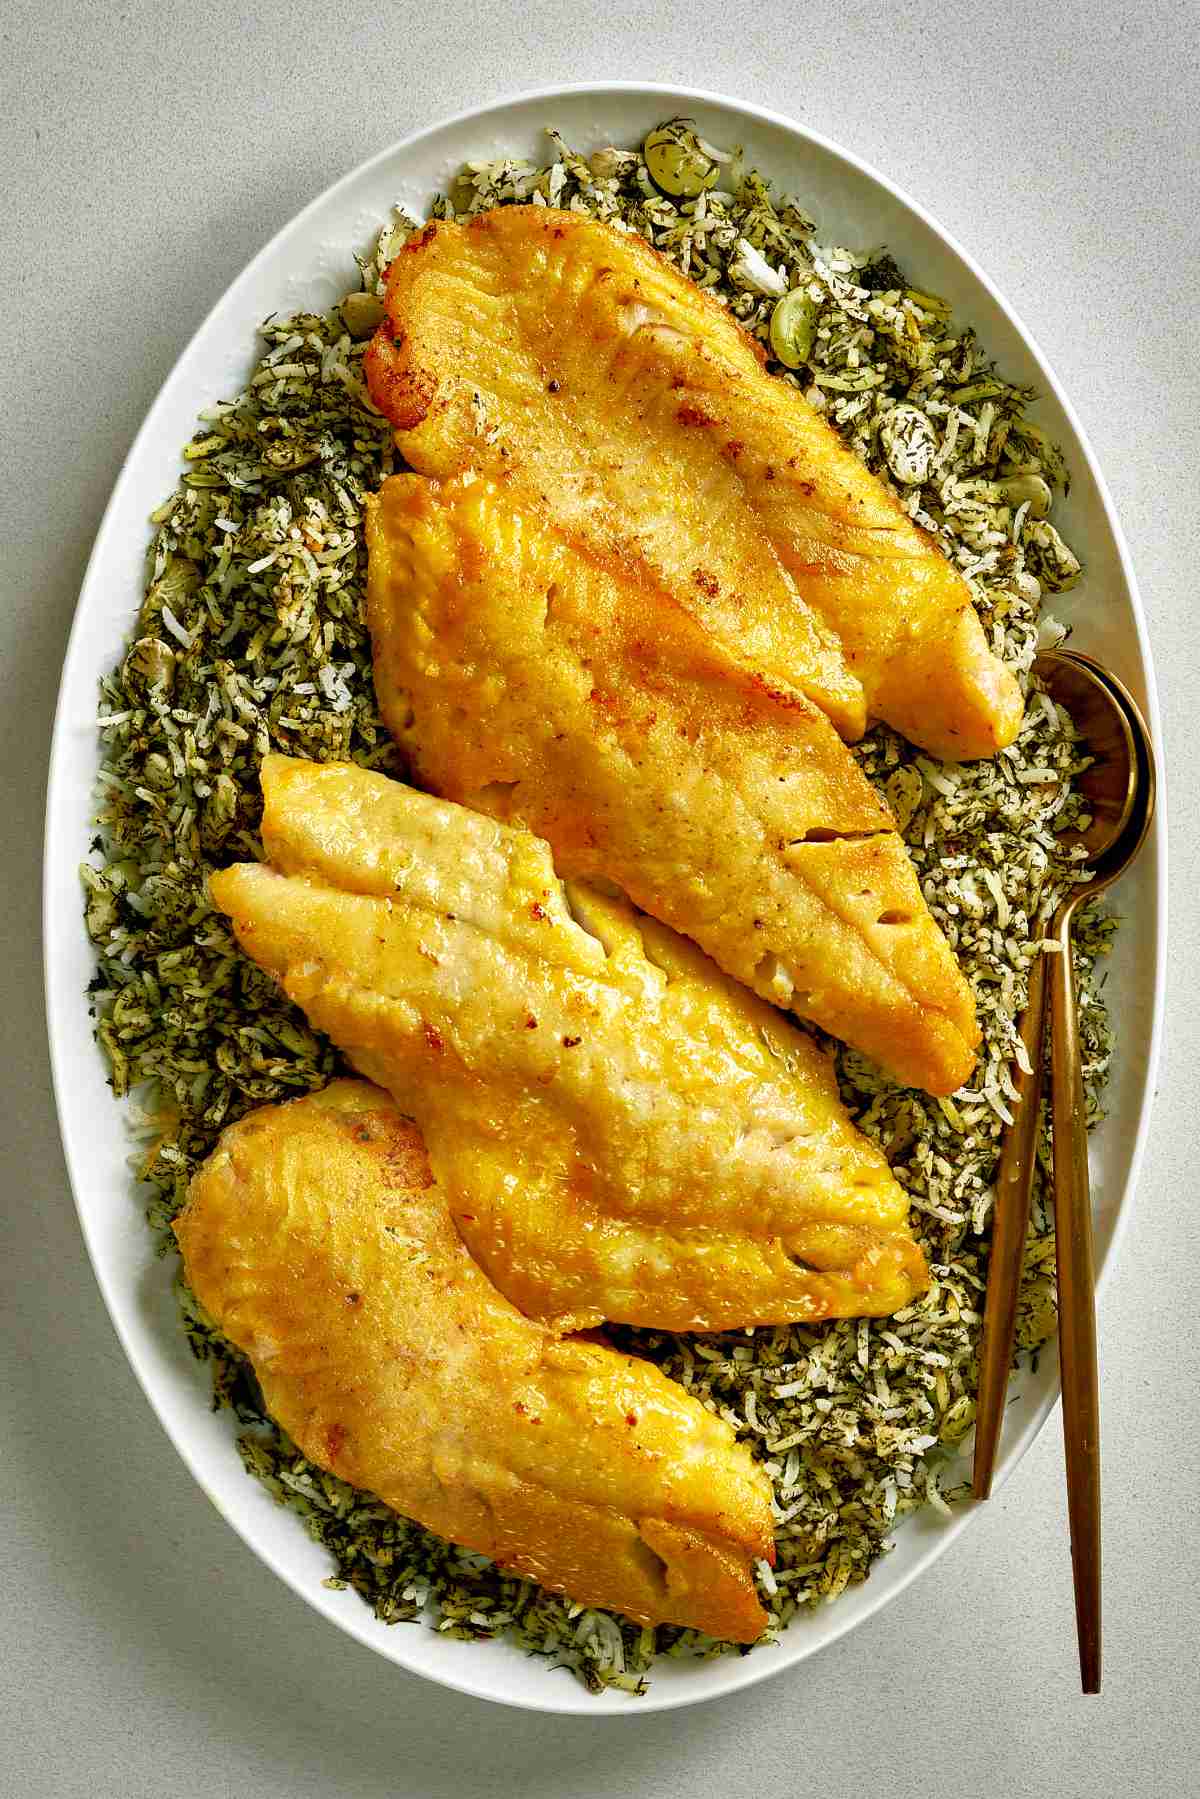 Fried fish on top of green rice.